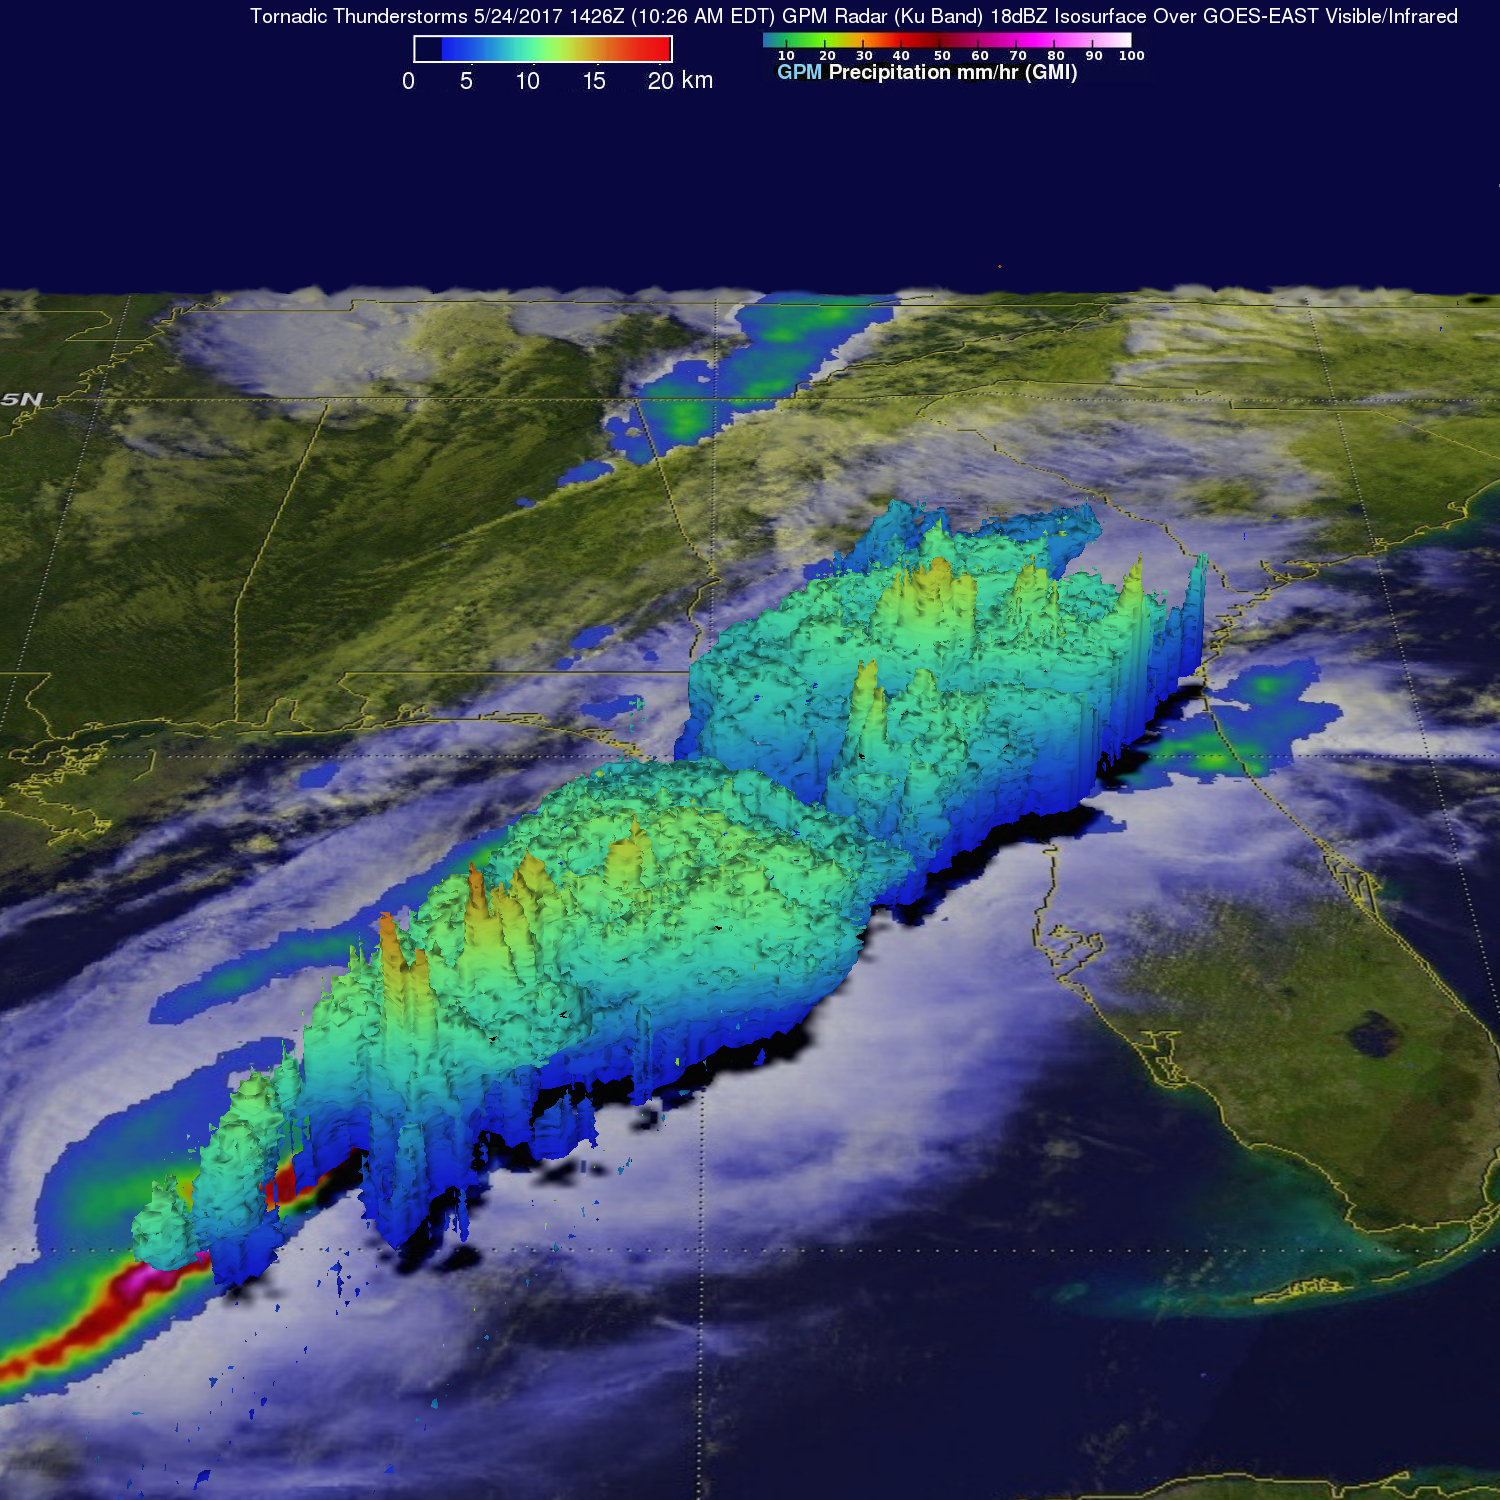 Tornado Spawning Storms Examined By GPM Satellite 